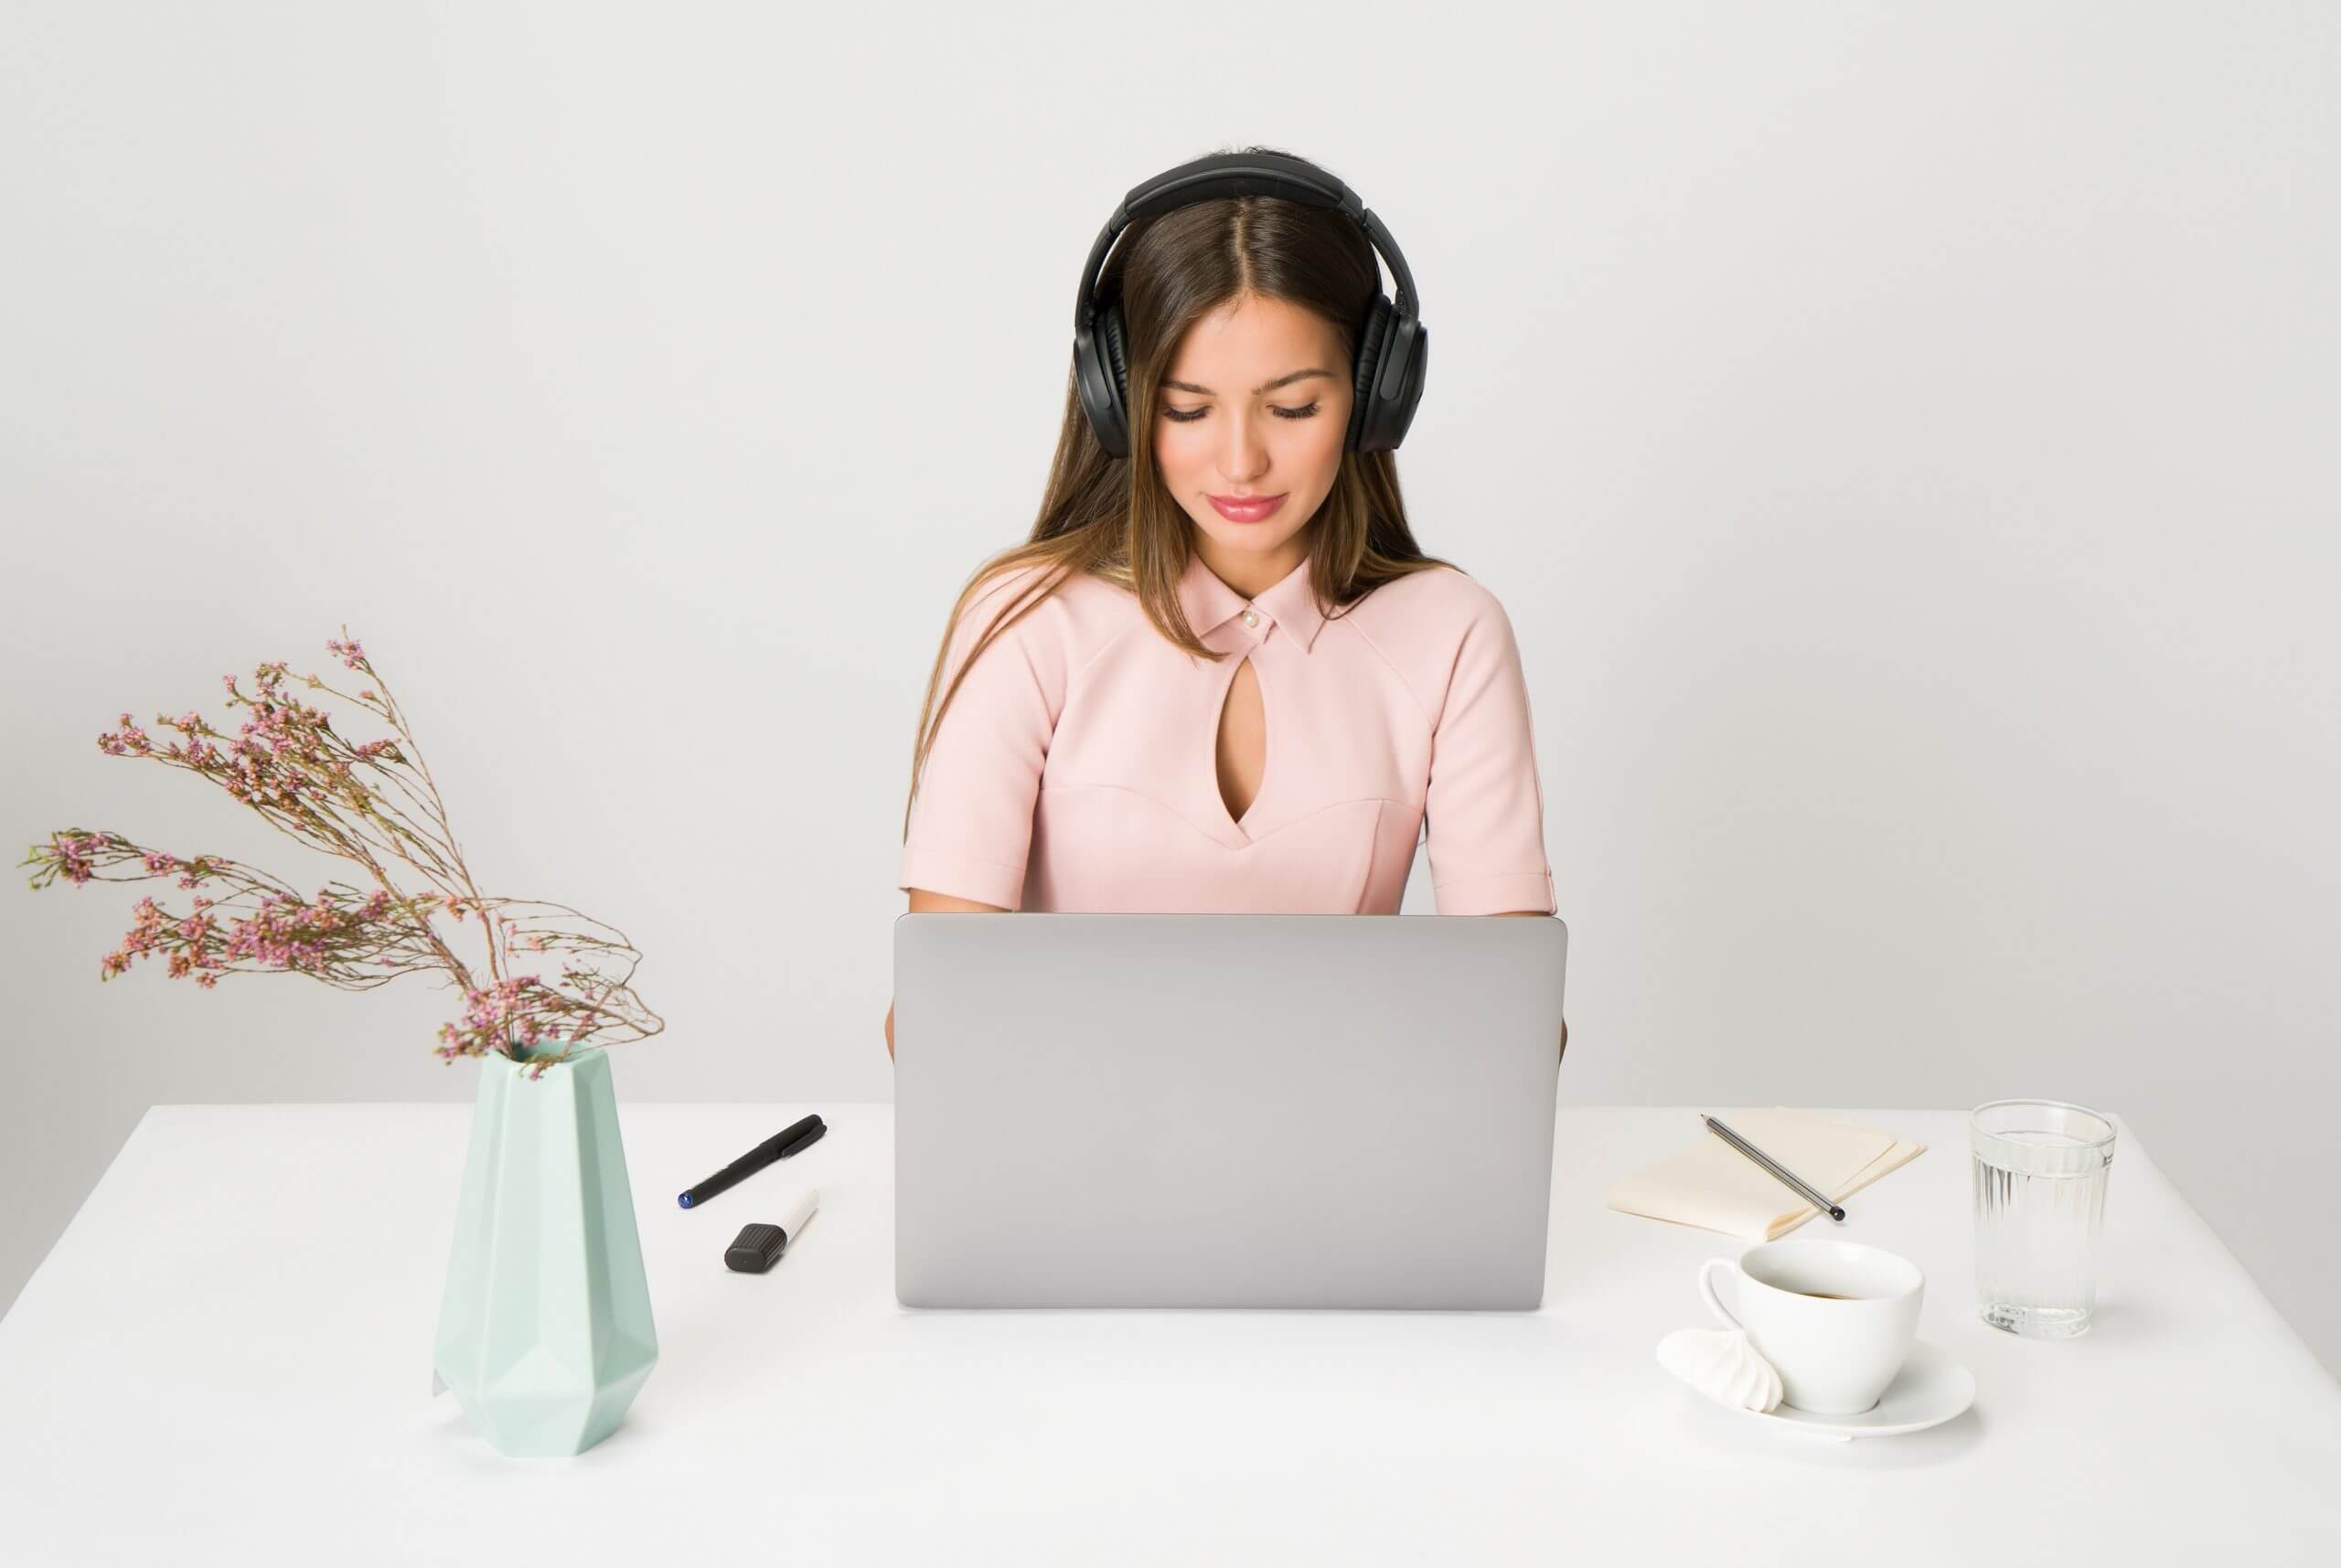 create social media posts, social media content, converting content, how to make effective social content - woman in pink with headphones in